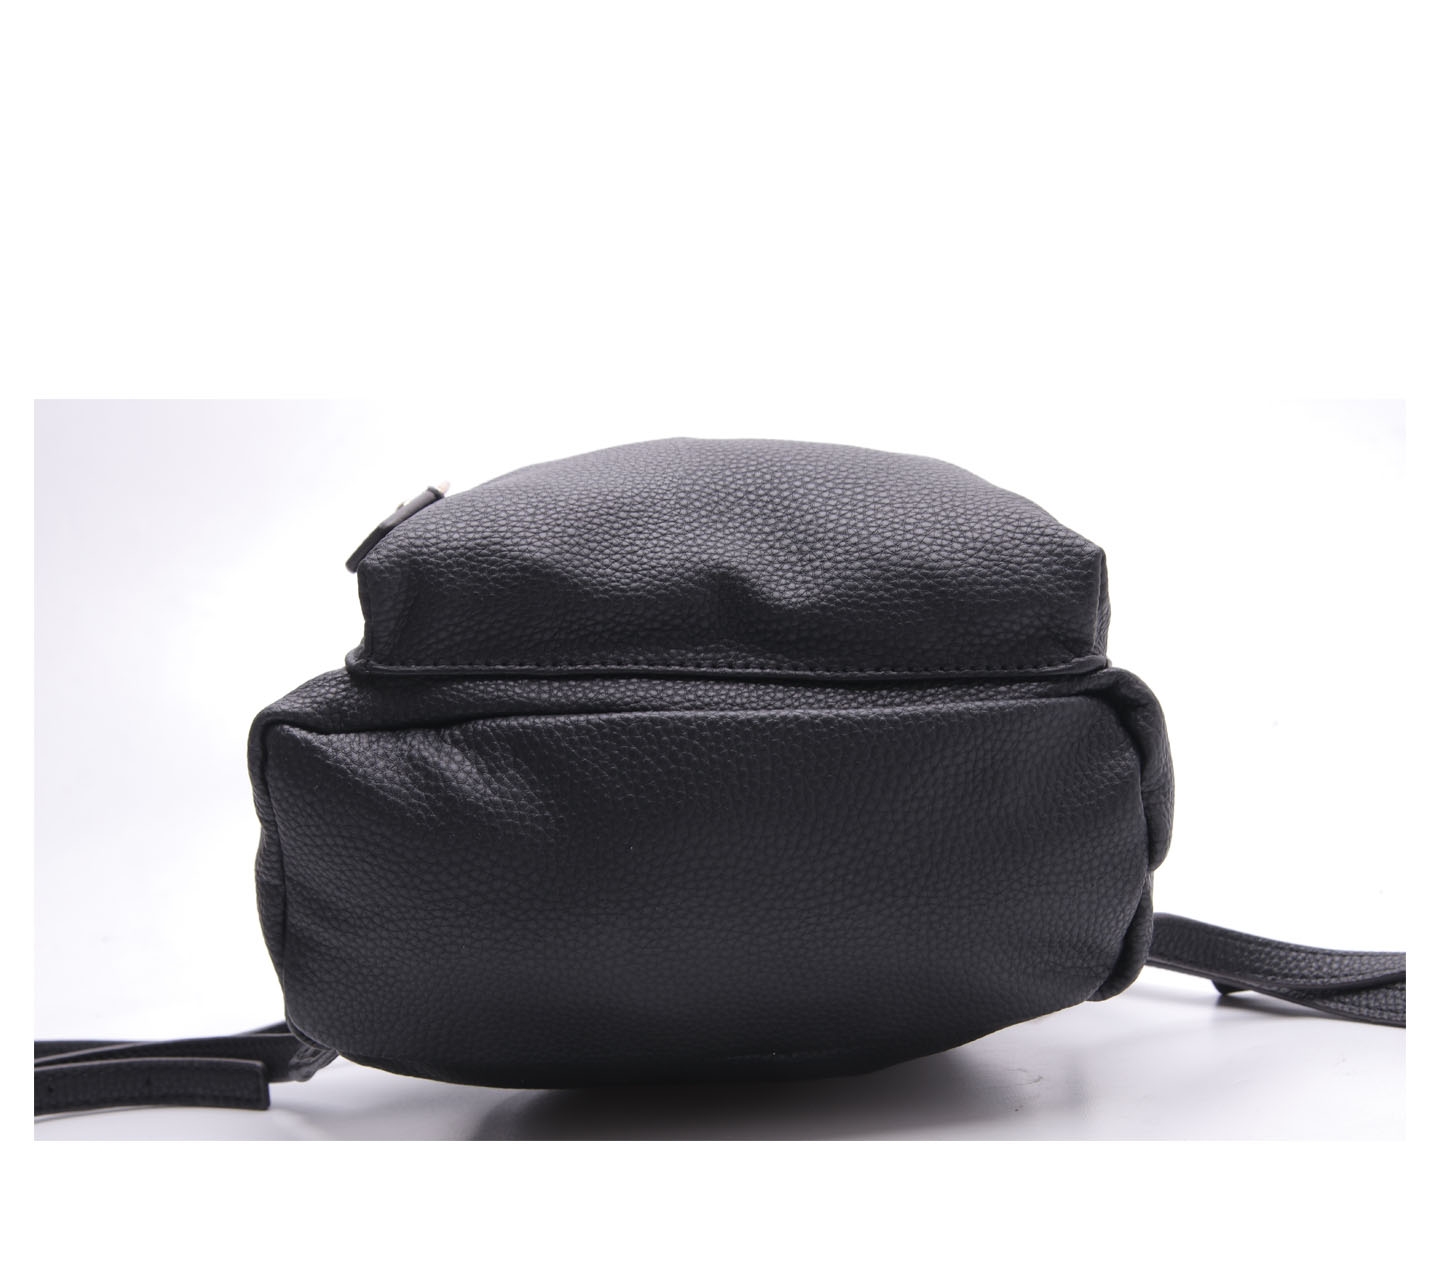 Guess Black Backpack